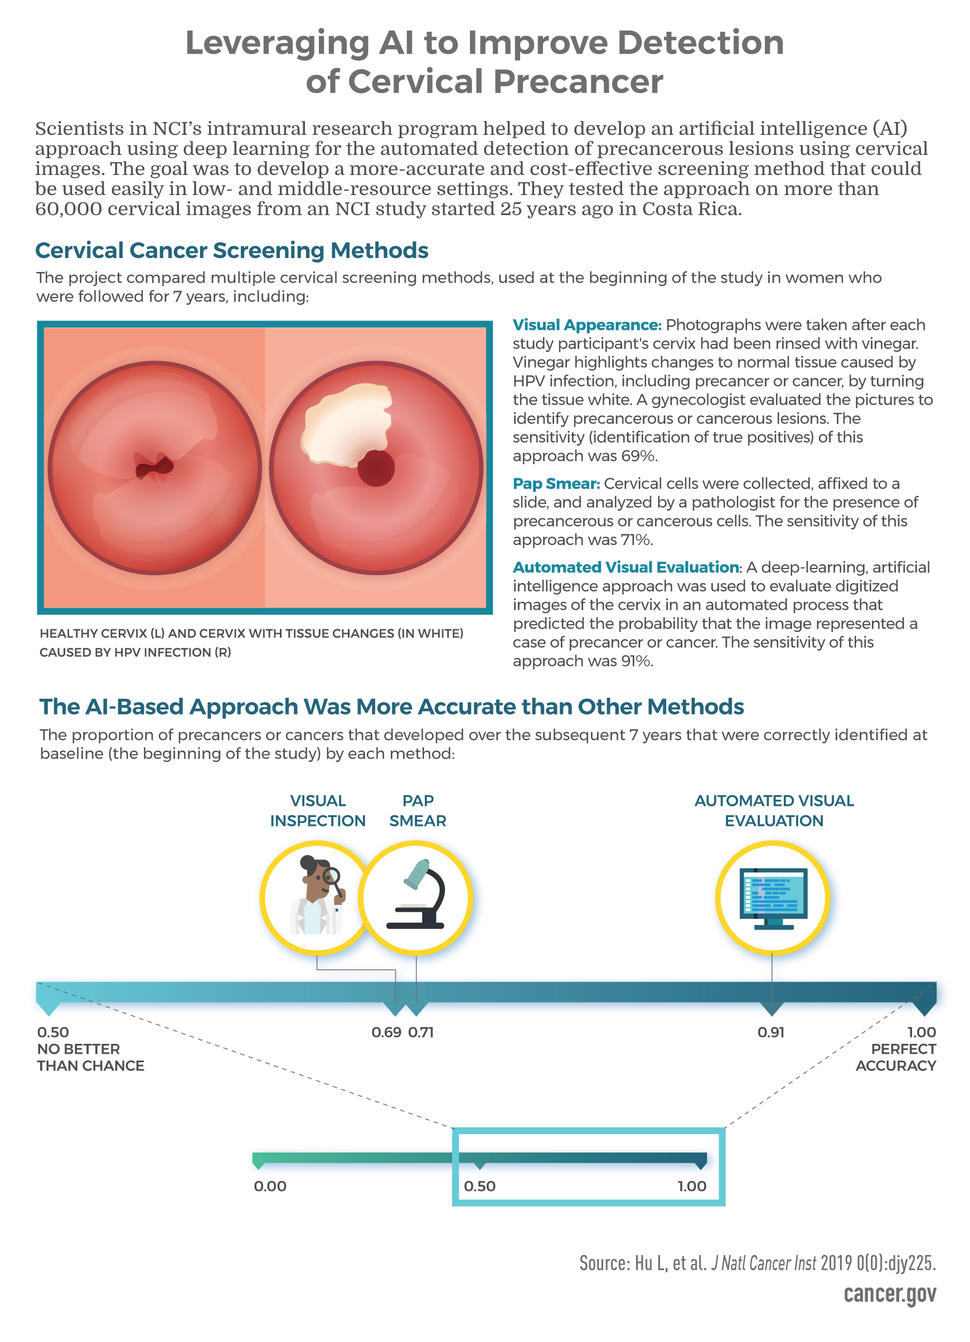 This infographic illustrates how researchers are leveraging artificial intelligence (AI) to improve the detection of cervical precancer. In an NCI study in Costa Rica, an AI-based screening approach called automated visual evaluation was more sensitive in detecting cervical precancers than visual evaluation and Pap smear.